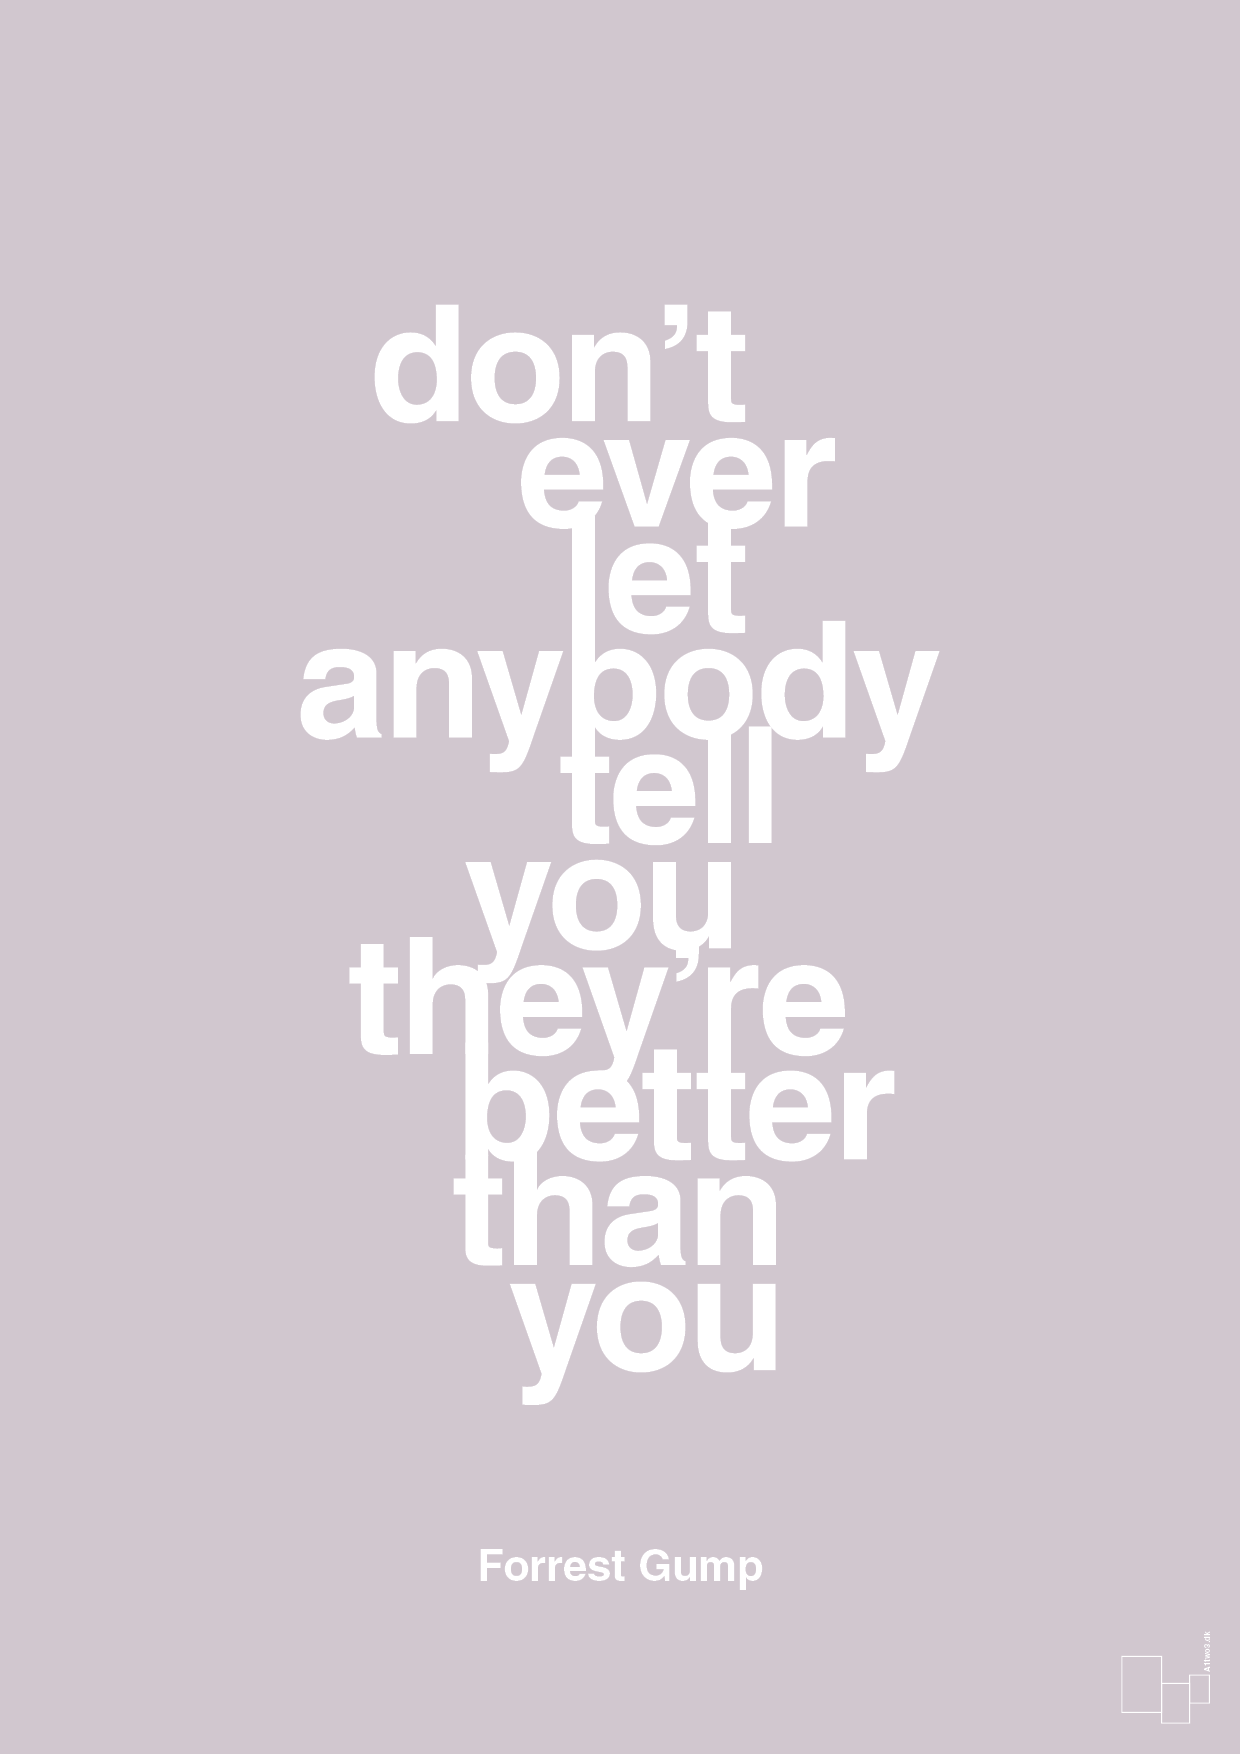 don’t ever let anybody tell you they’re better than you - Plakat med Citater i Dusty Lilac